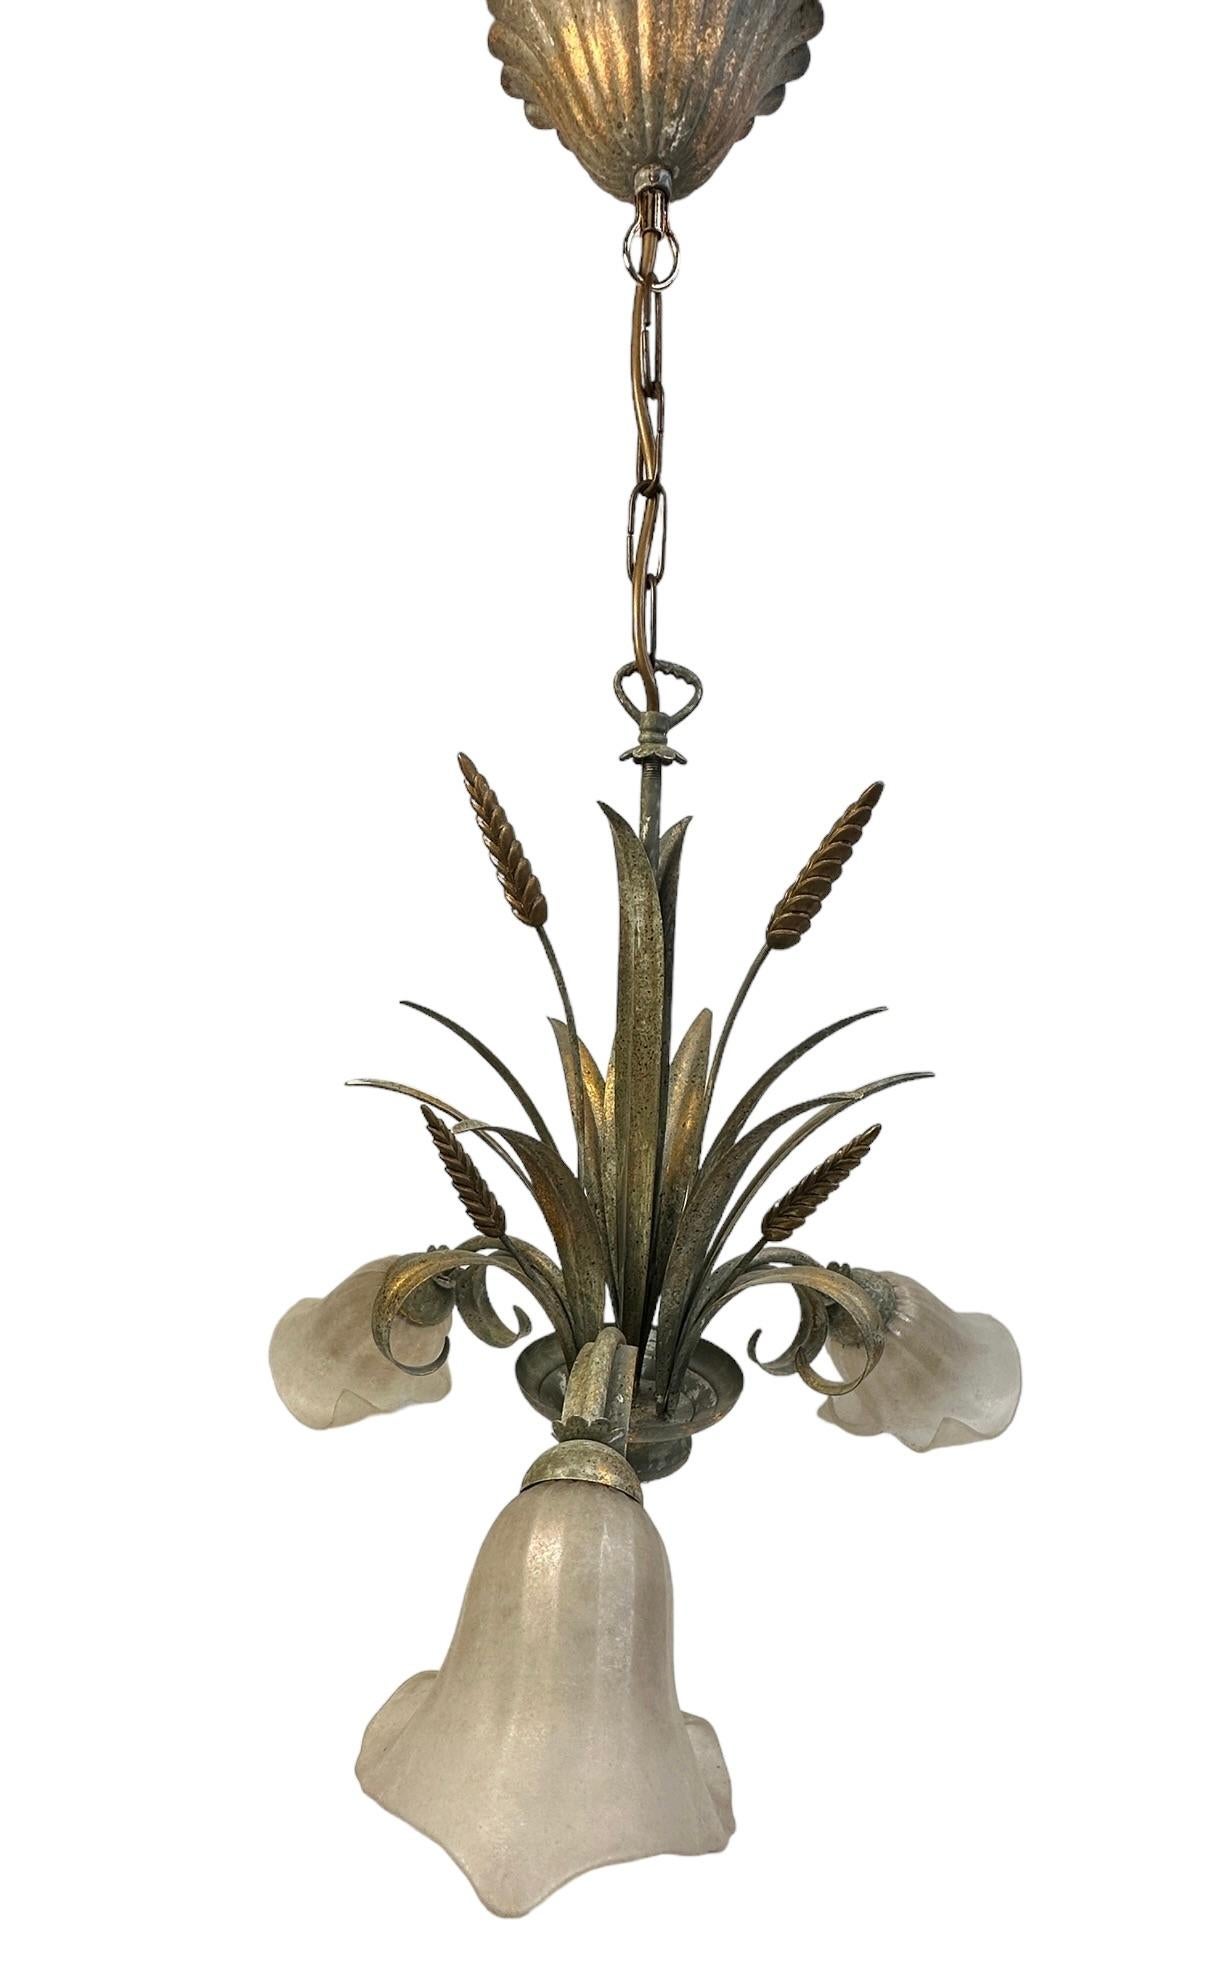 Metal & Glass Shade Wheat Sheaf Chandelier Tole Toleware Coco Chanel Style For Sale 1